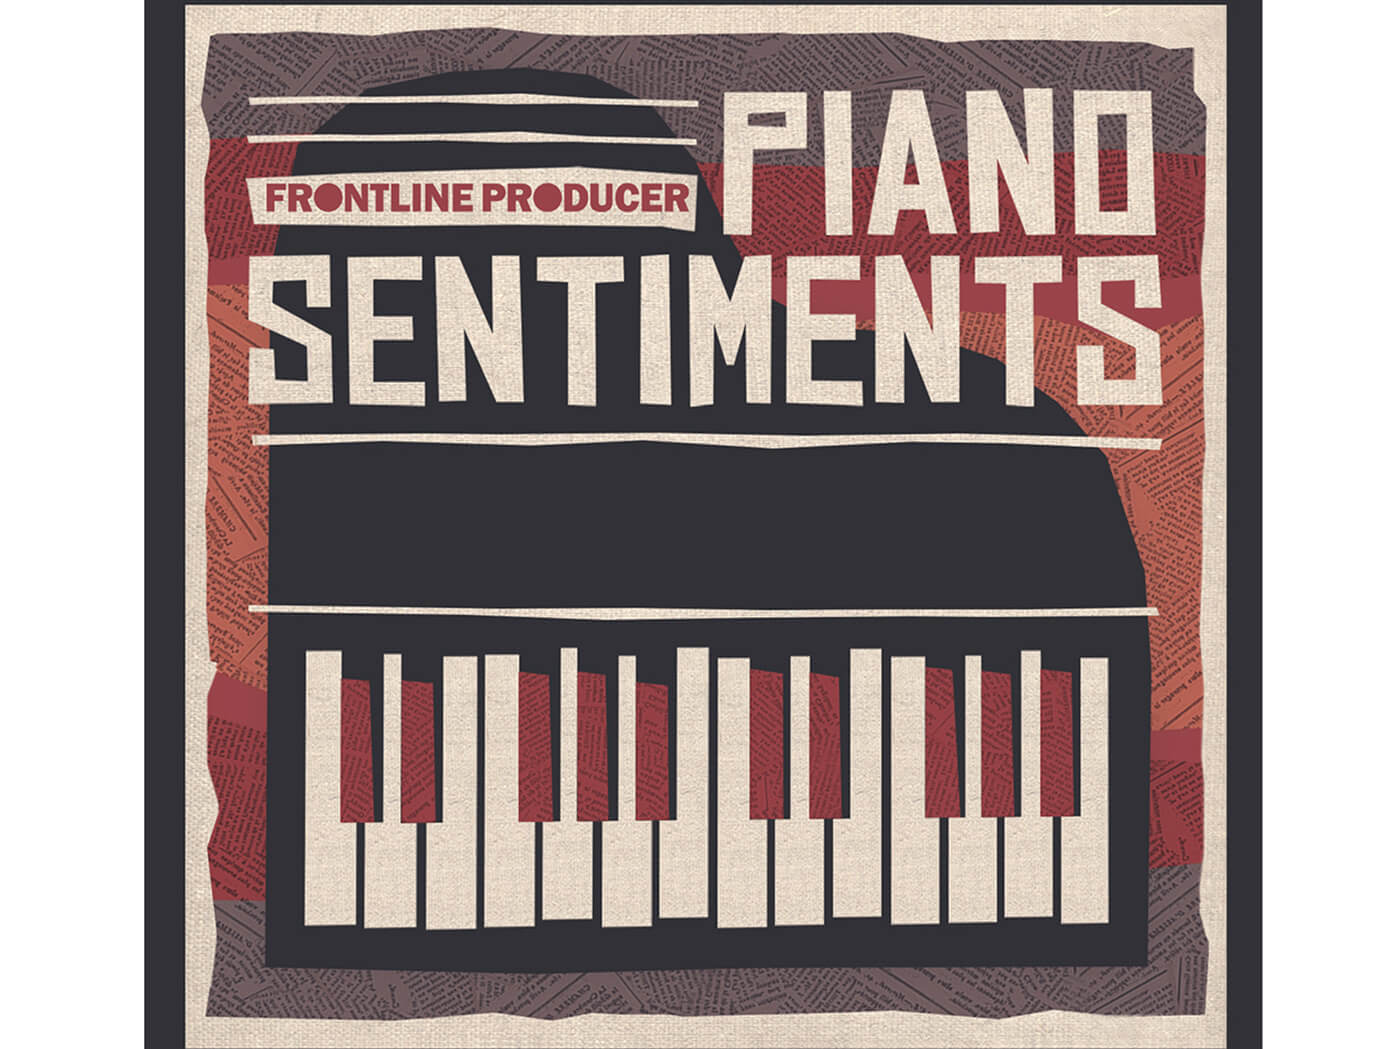 Frontline Producer - Piano Sentiments